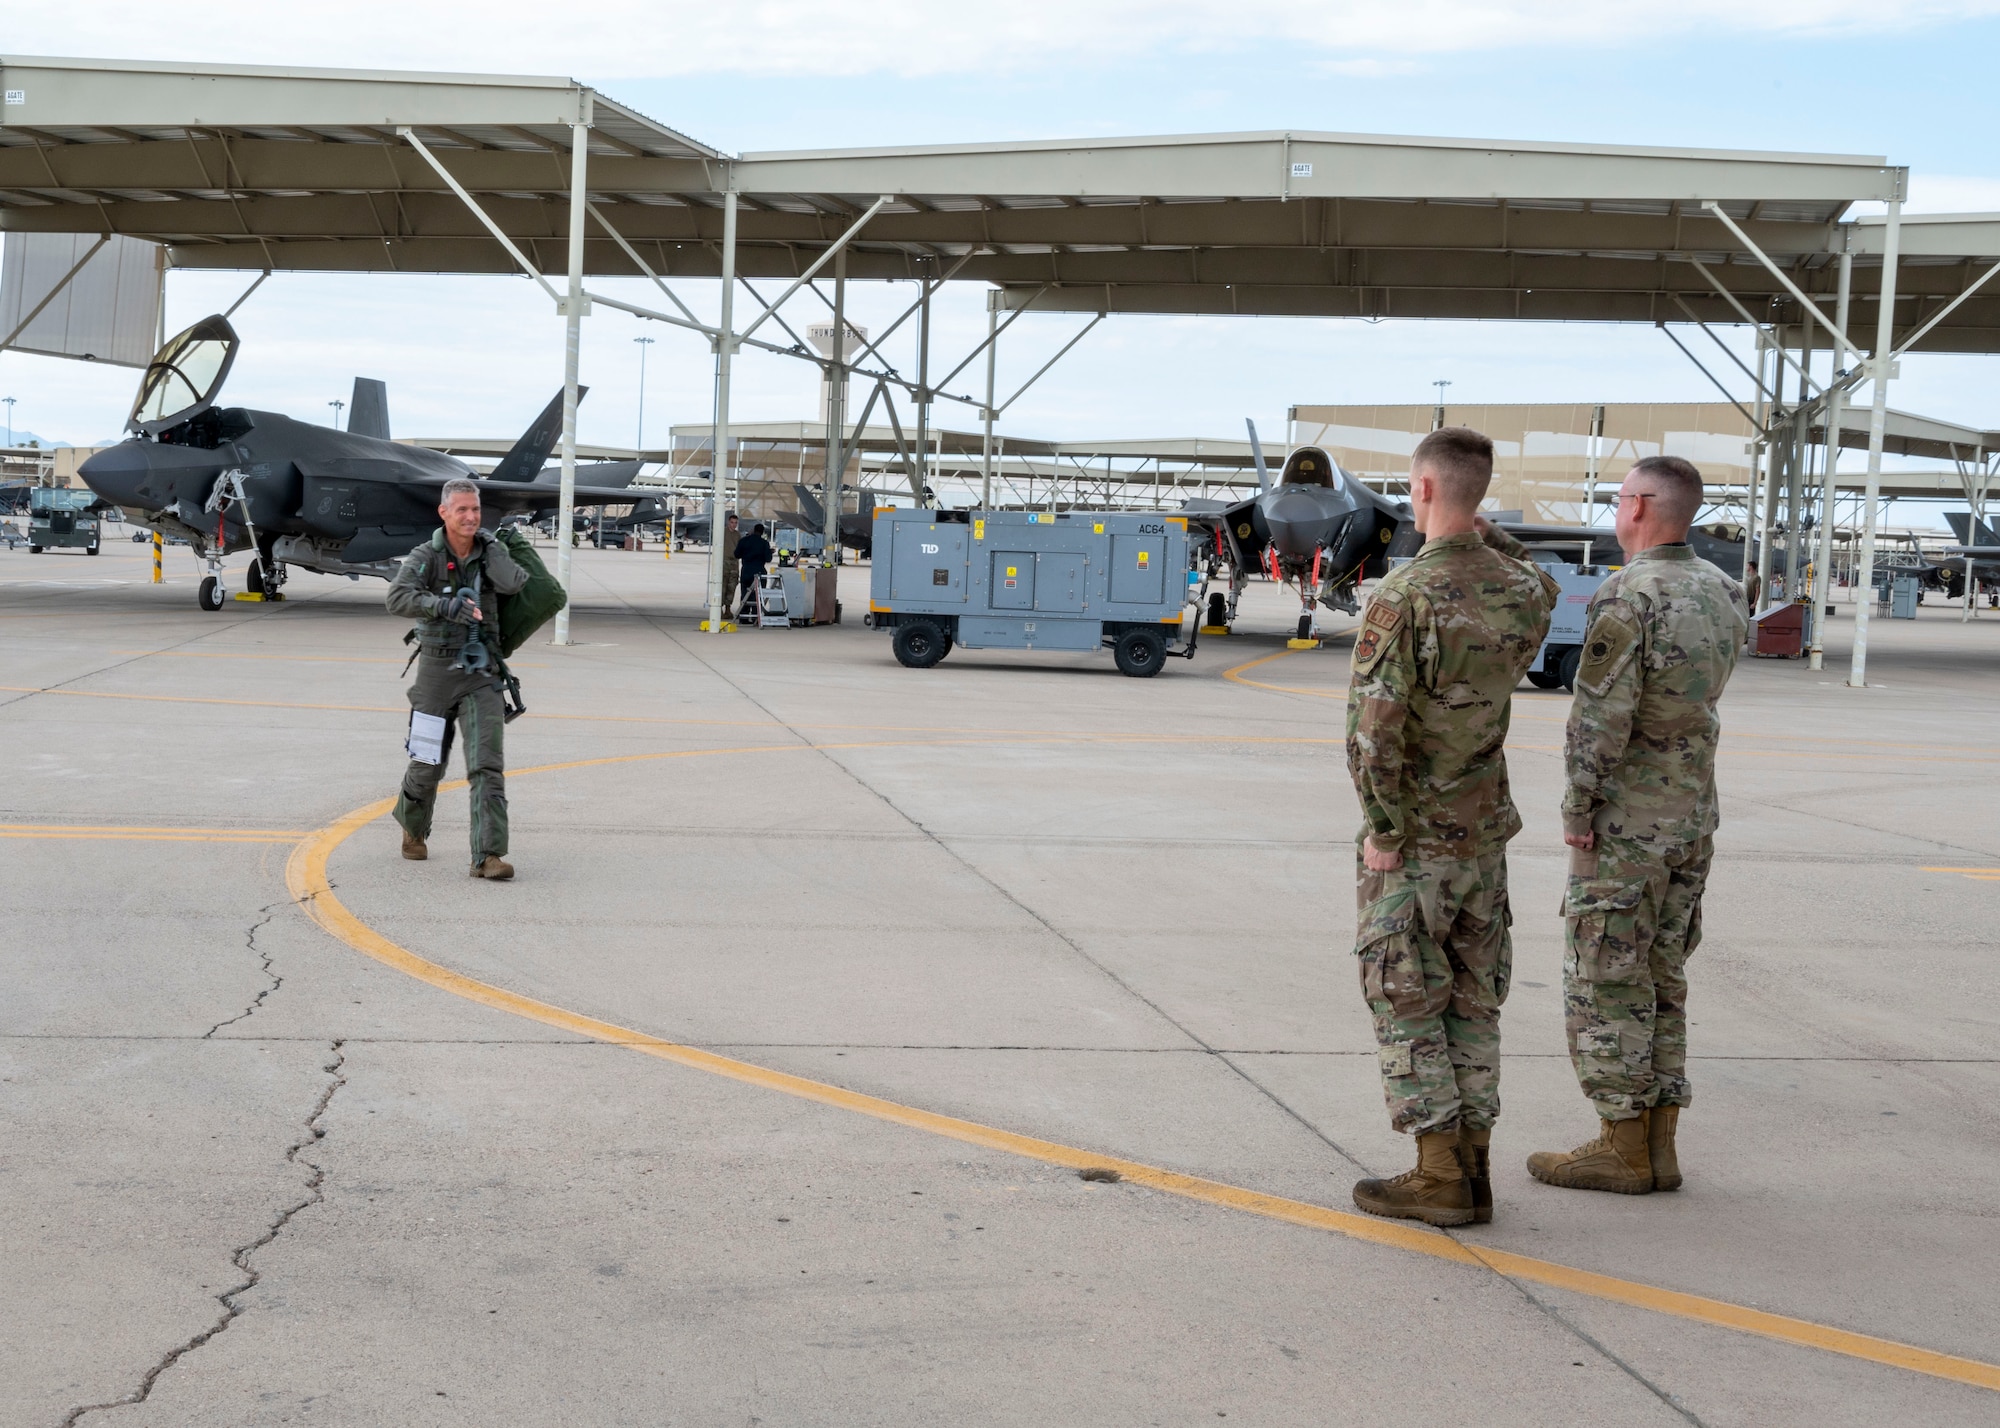 U.S. Air Force Brig. Gen. Gregory Kreuder, 56th Fighter Wing commander, steps out to the flight line to meet CMSgt Donald Price, 61st Aircraft Maintenance Unit senior enlisted leader, and Senior Airman Aaron Robosky, 61st Aircraft Maintenance Unit dedicated crew chief, for his “fini” flight July 25, 2022, at Luke Air Force Base, Arizona.